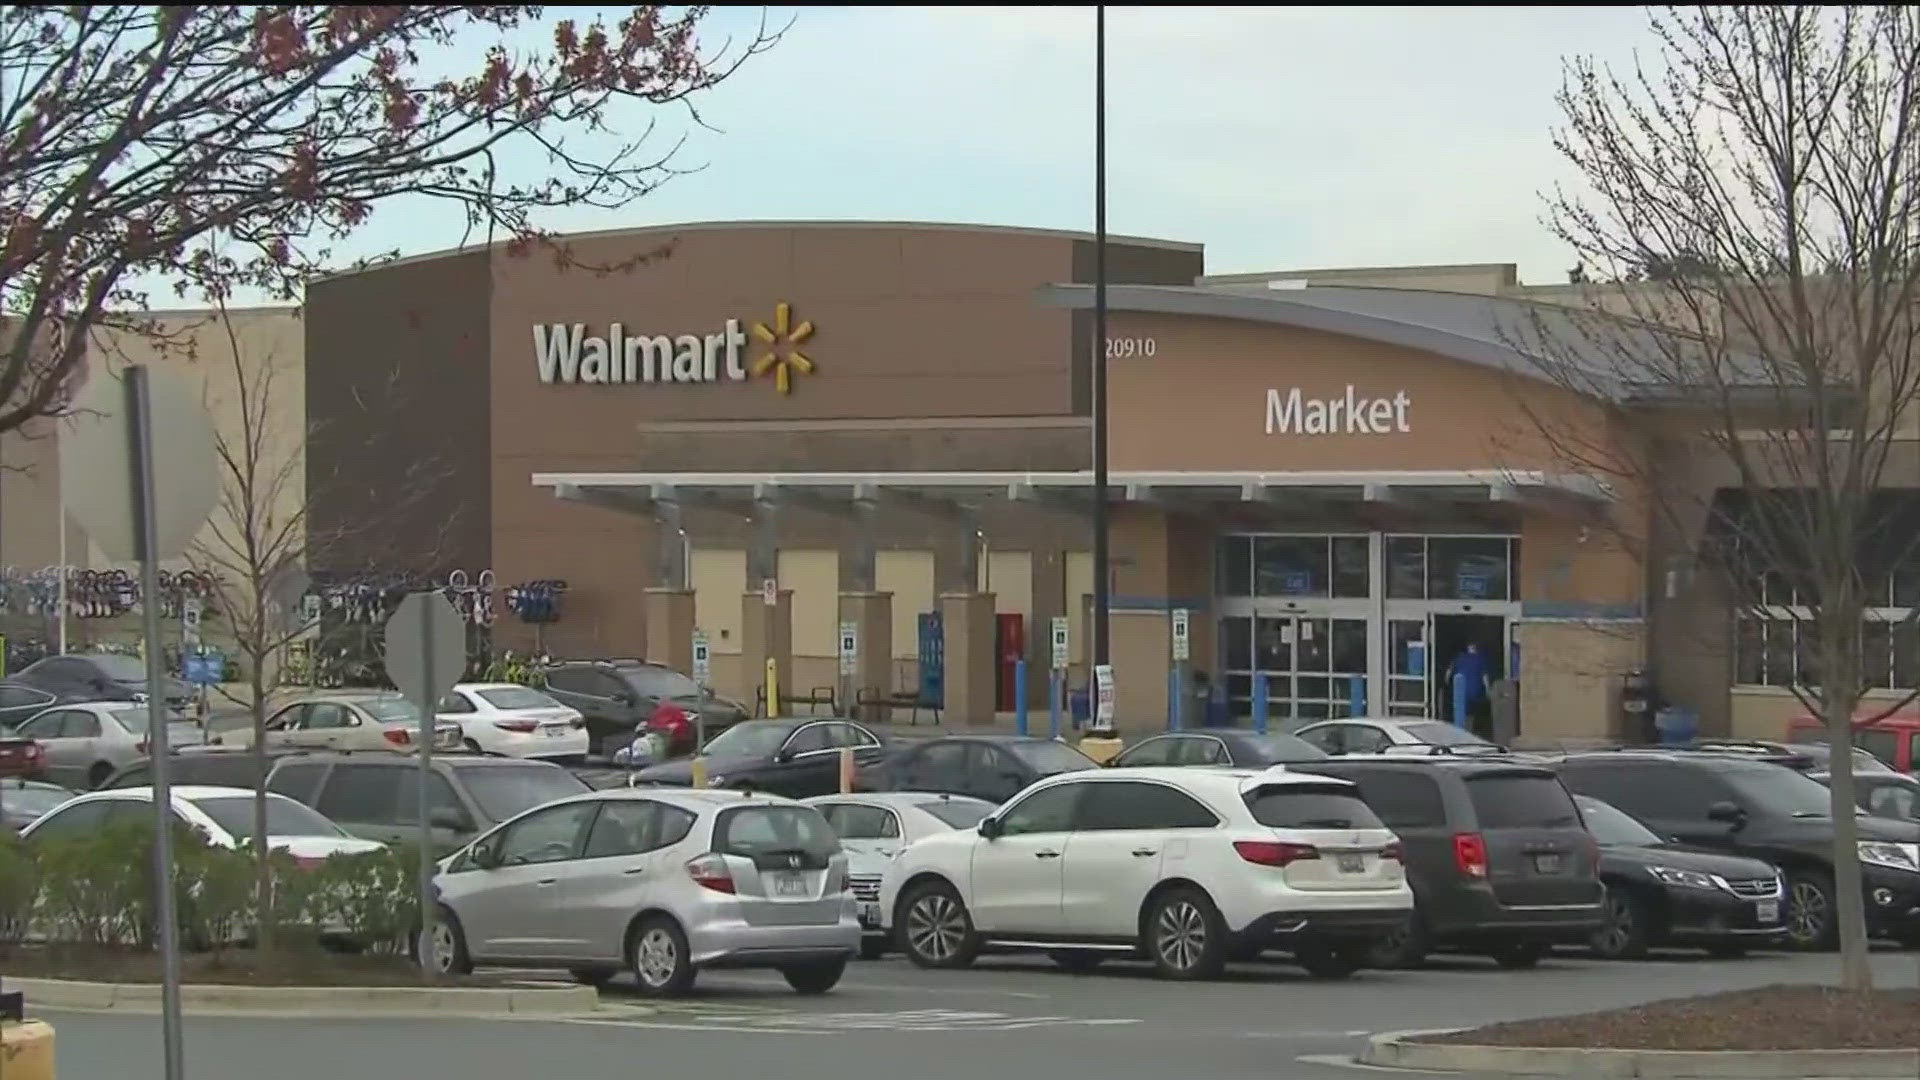 Walmart does not yet have a specific date for each center's closure, but officials said they will share an update as soon as the decision is made.